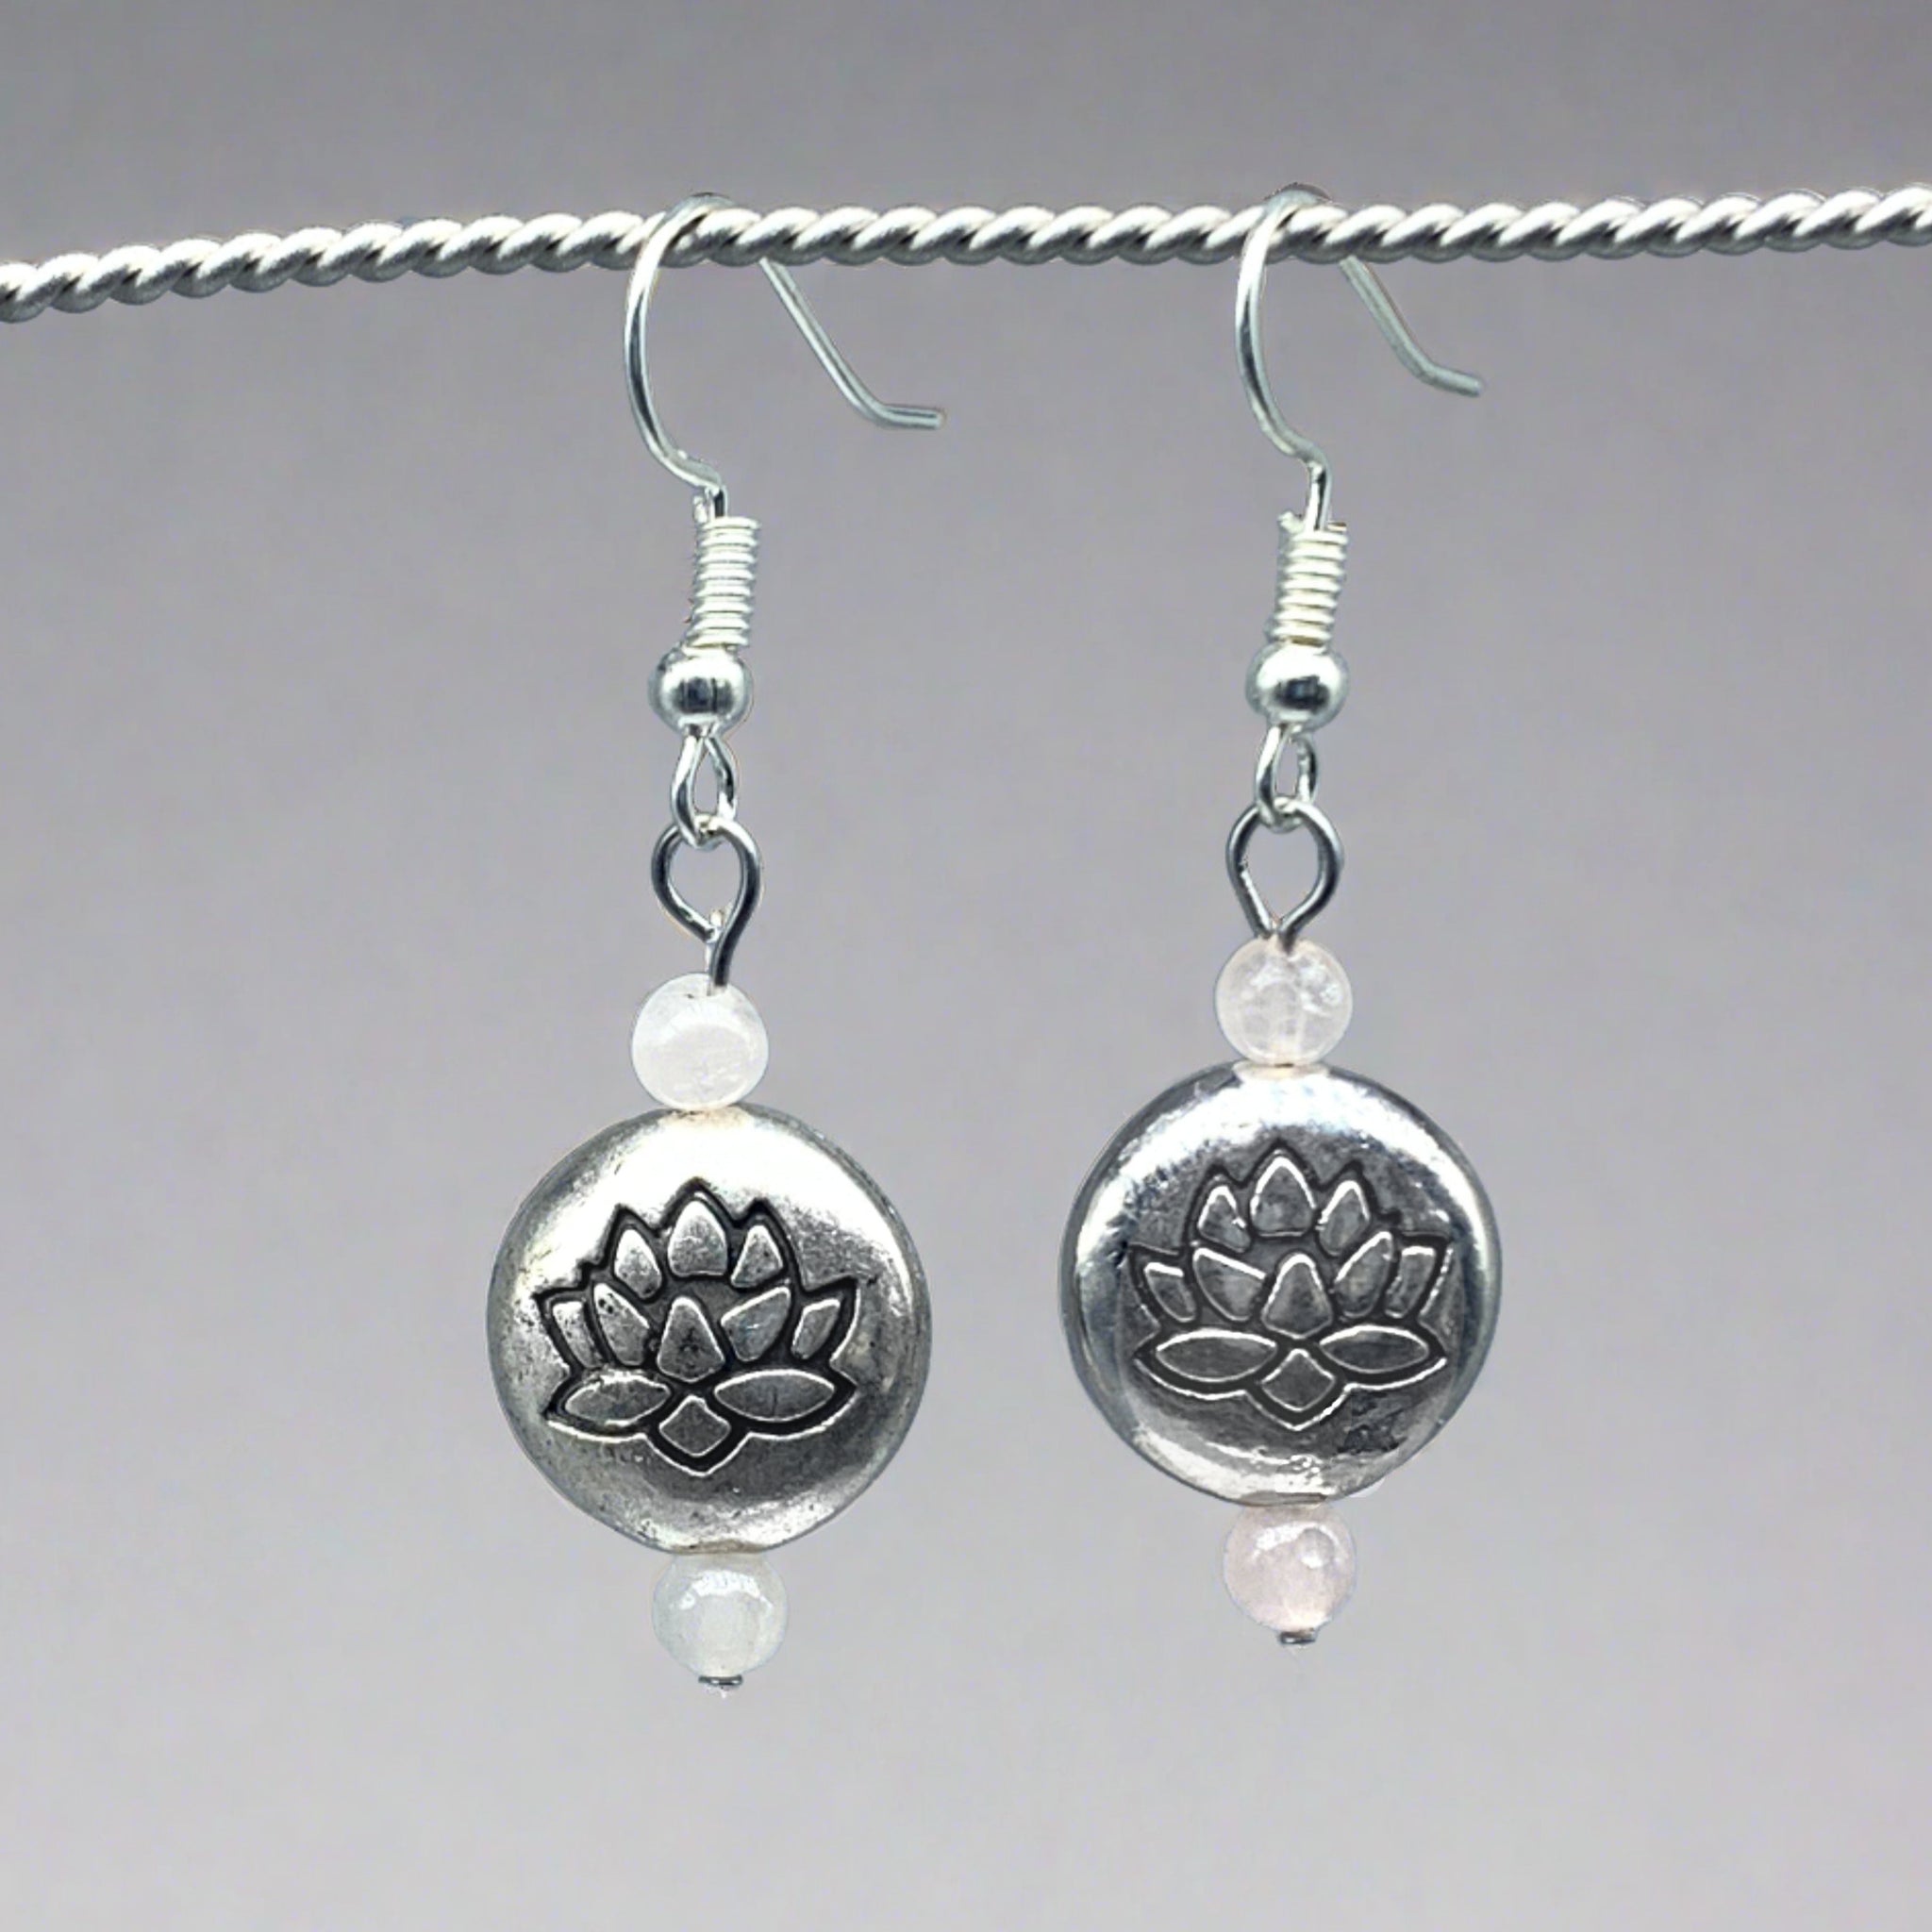 Lotus flower earrings for mindfulness on gray and yellow rock background